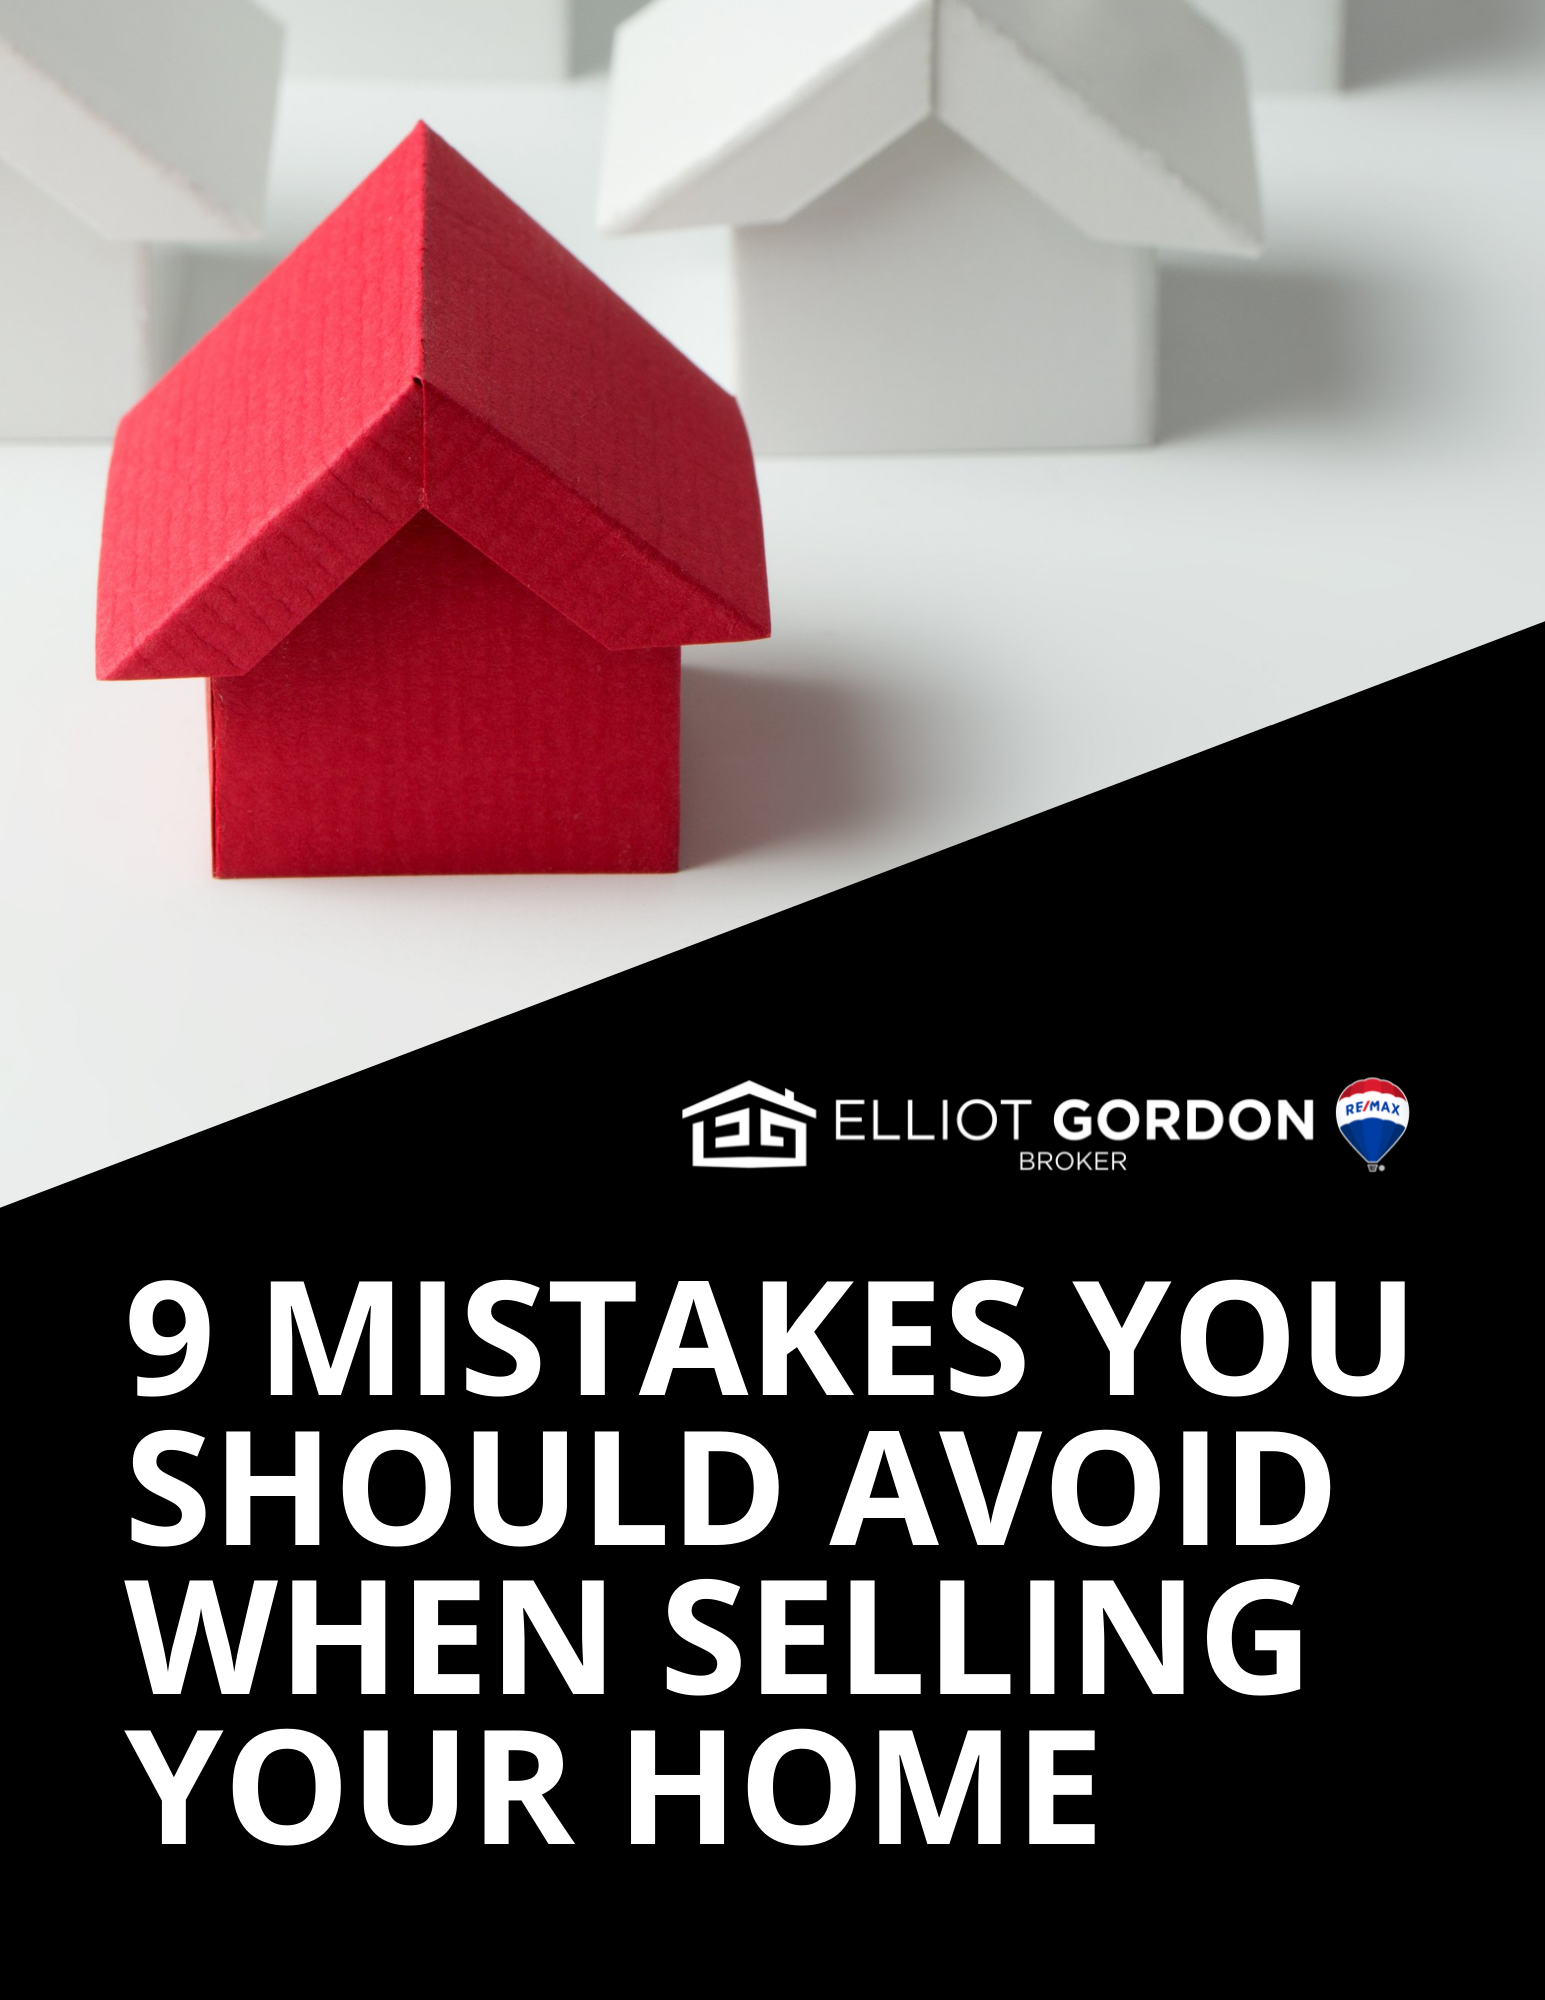 9 mistakes you should avoid when selling your home.